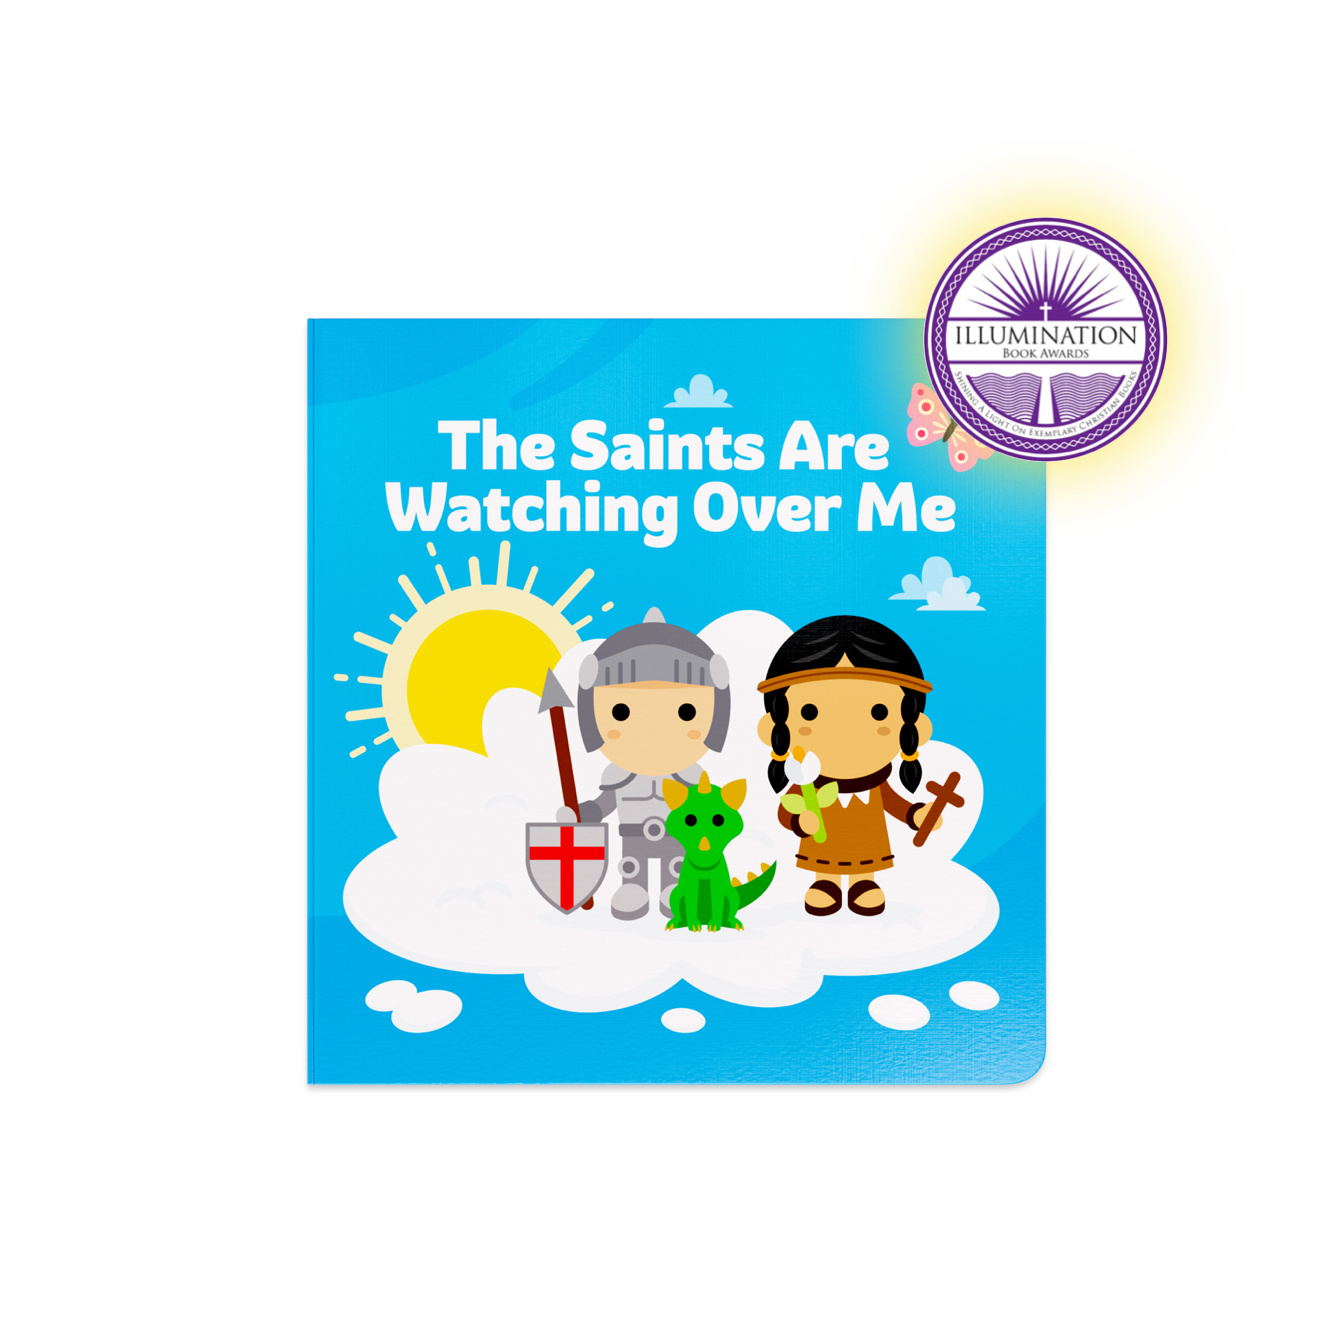 Board Book - "The Saints Are Watching Over Me"